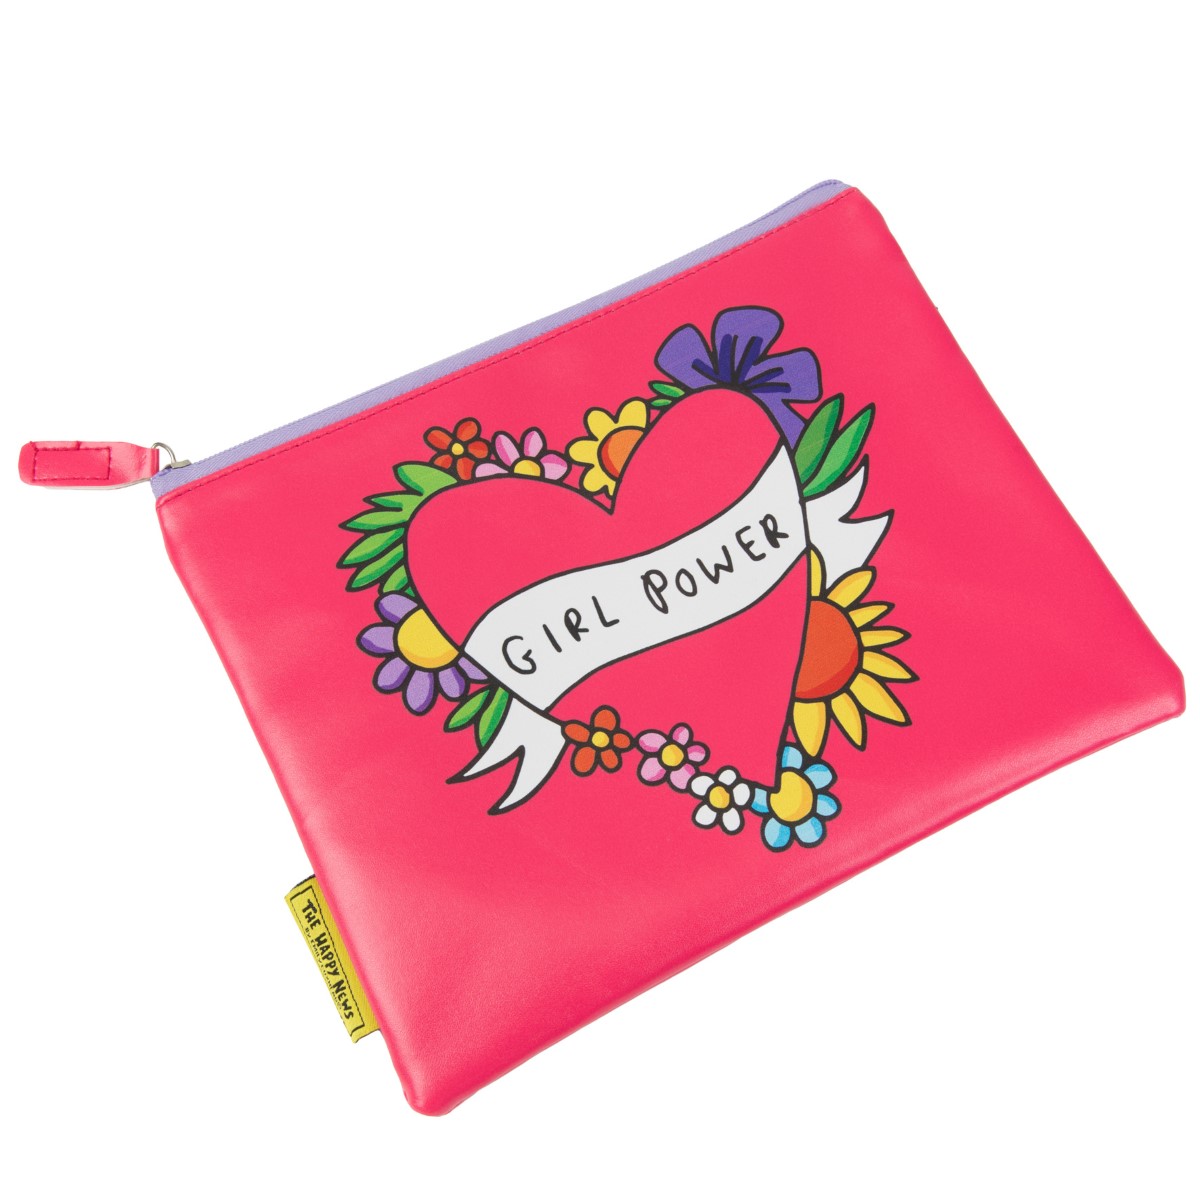 The Happy News Girl Power Large Pouch